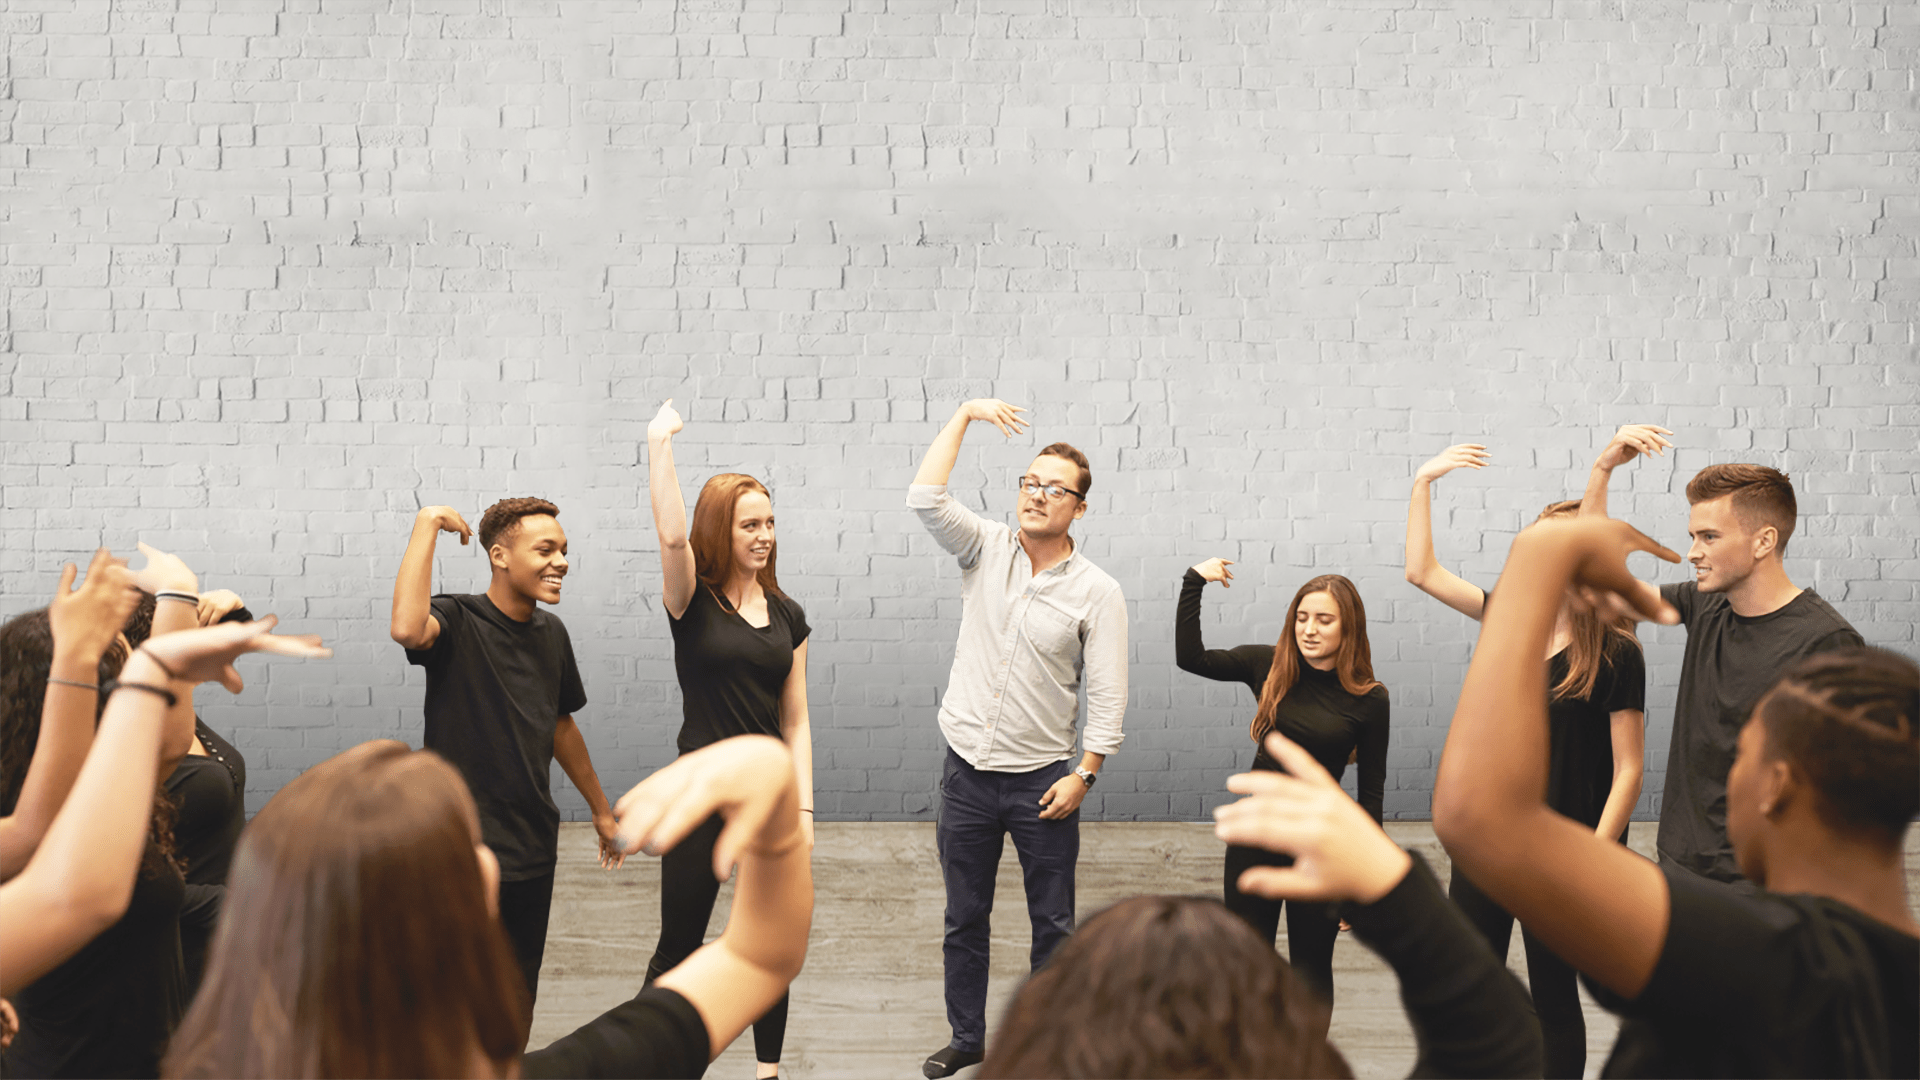 Actors practicing. A group of people wearing black, except for one man with glasses wearing a white shirt, have their arms lifted in a 90 degree angle with their wrist also in a 90 degree angle. Background: Grey brick wall